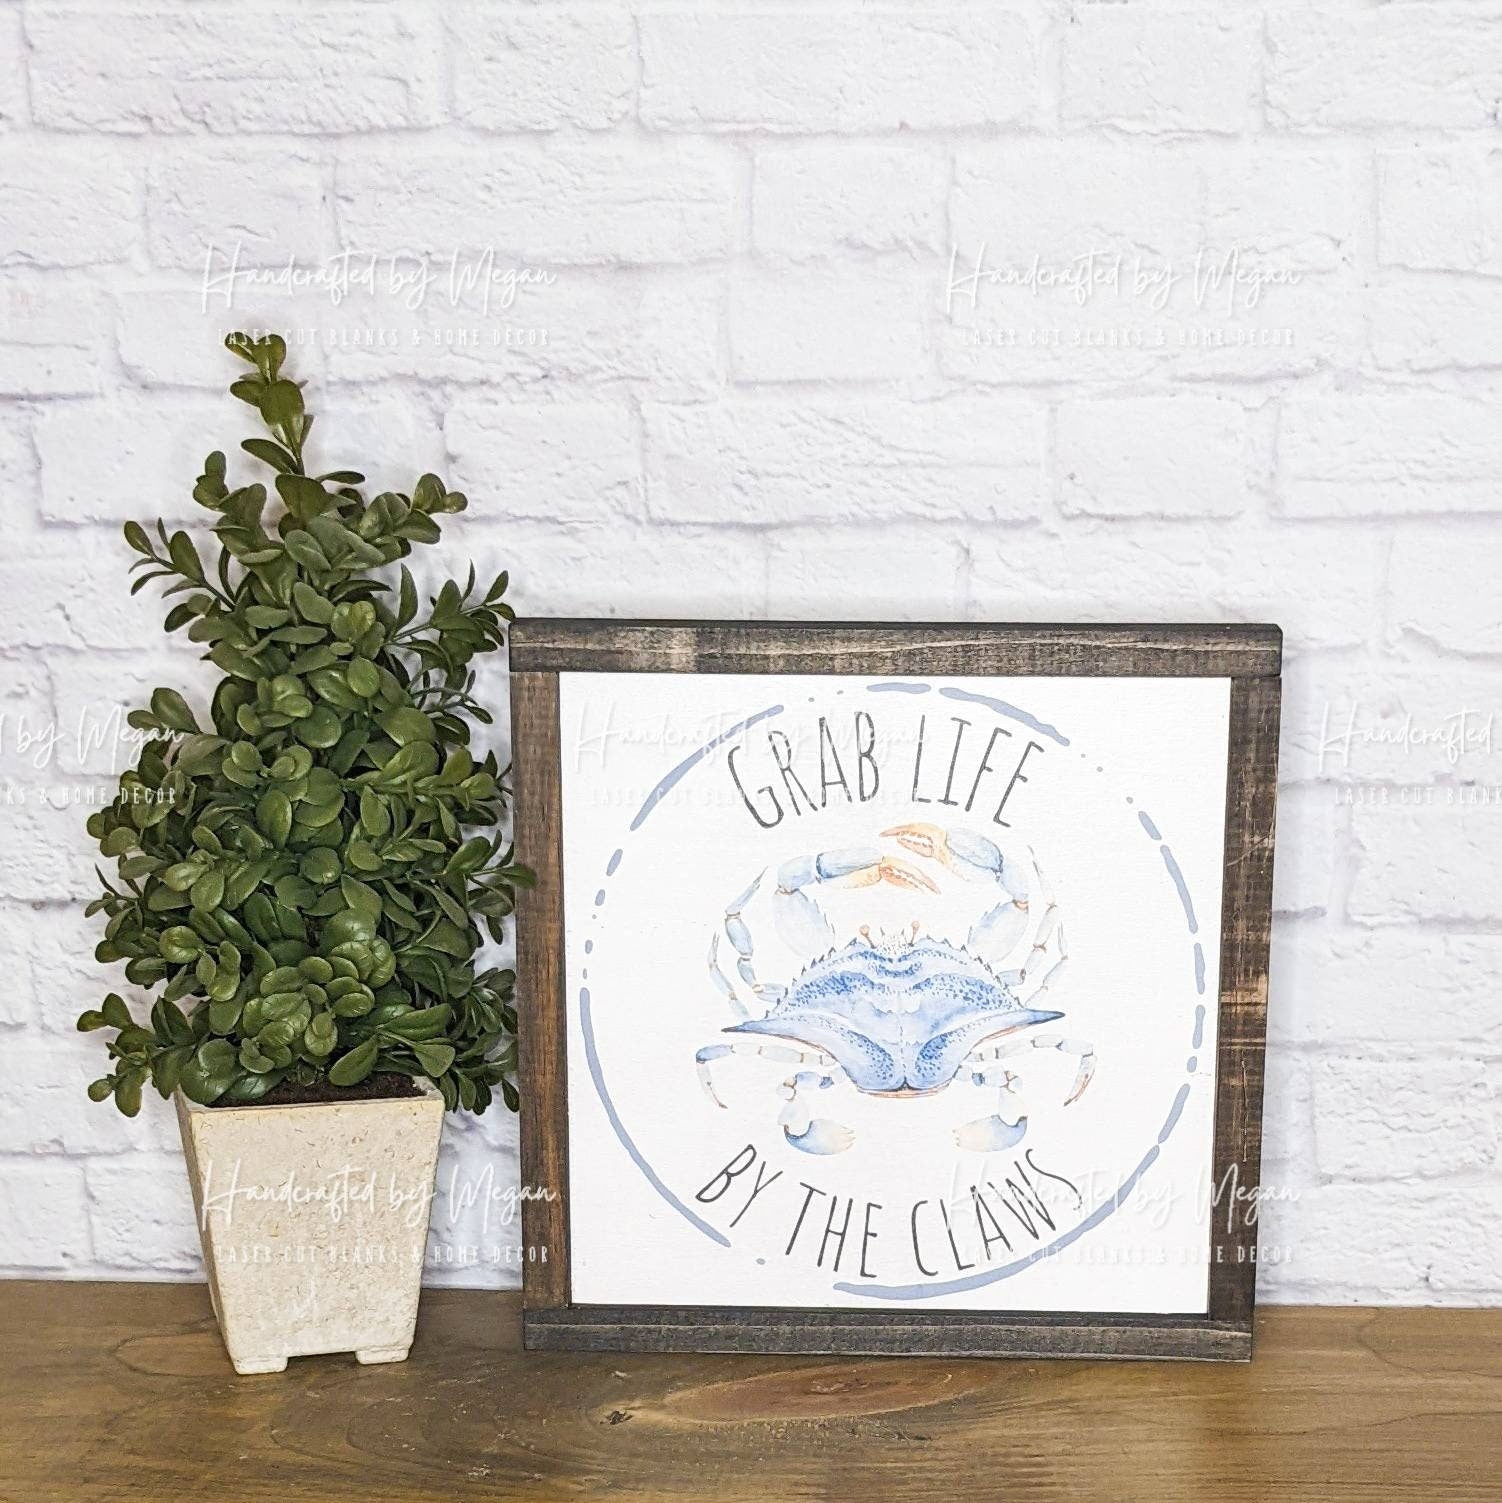 Crab Life By The Claws, wood sign, framed sign, farmhouse decor, Everyday Decor